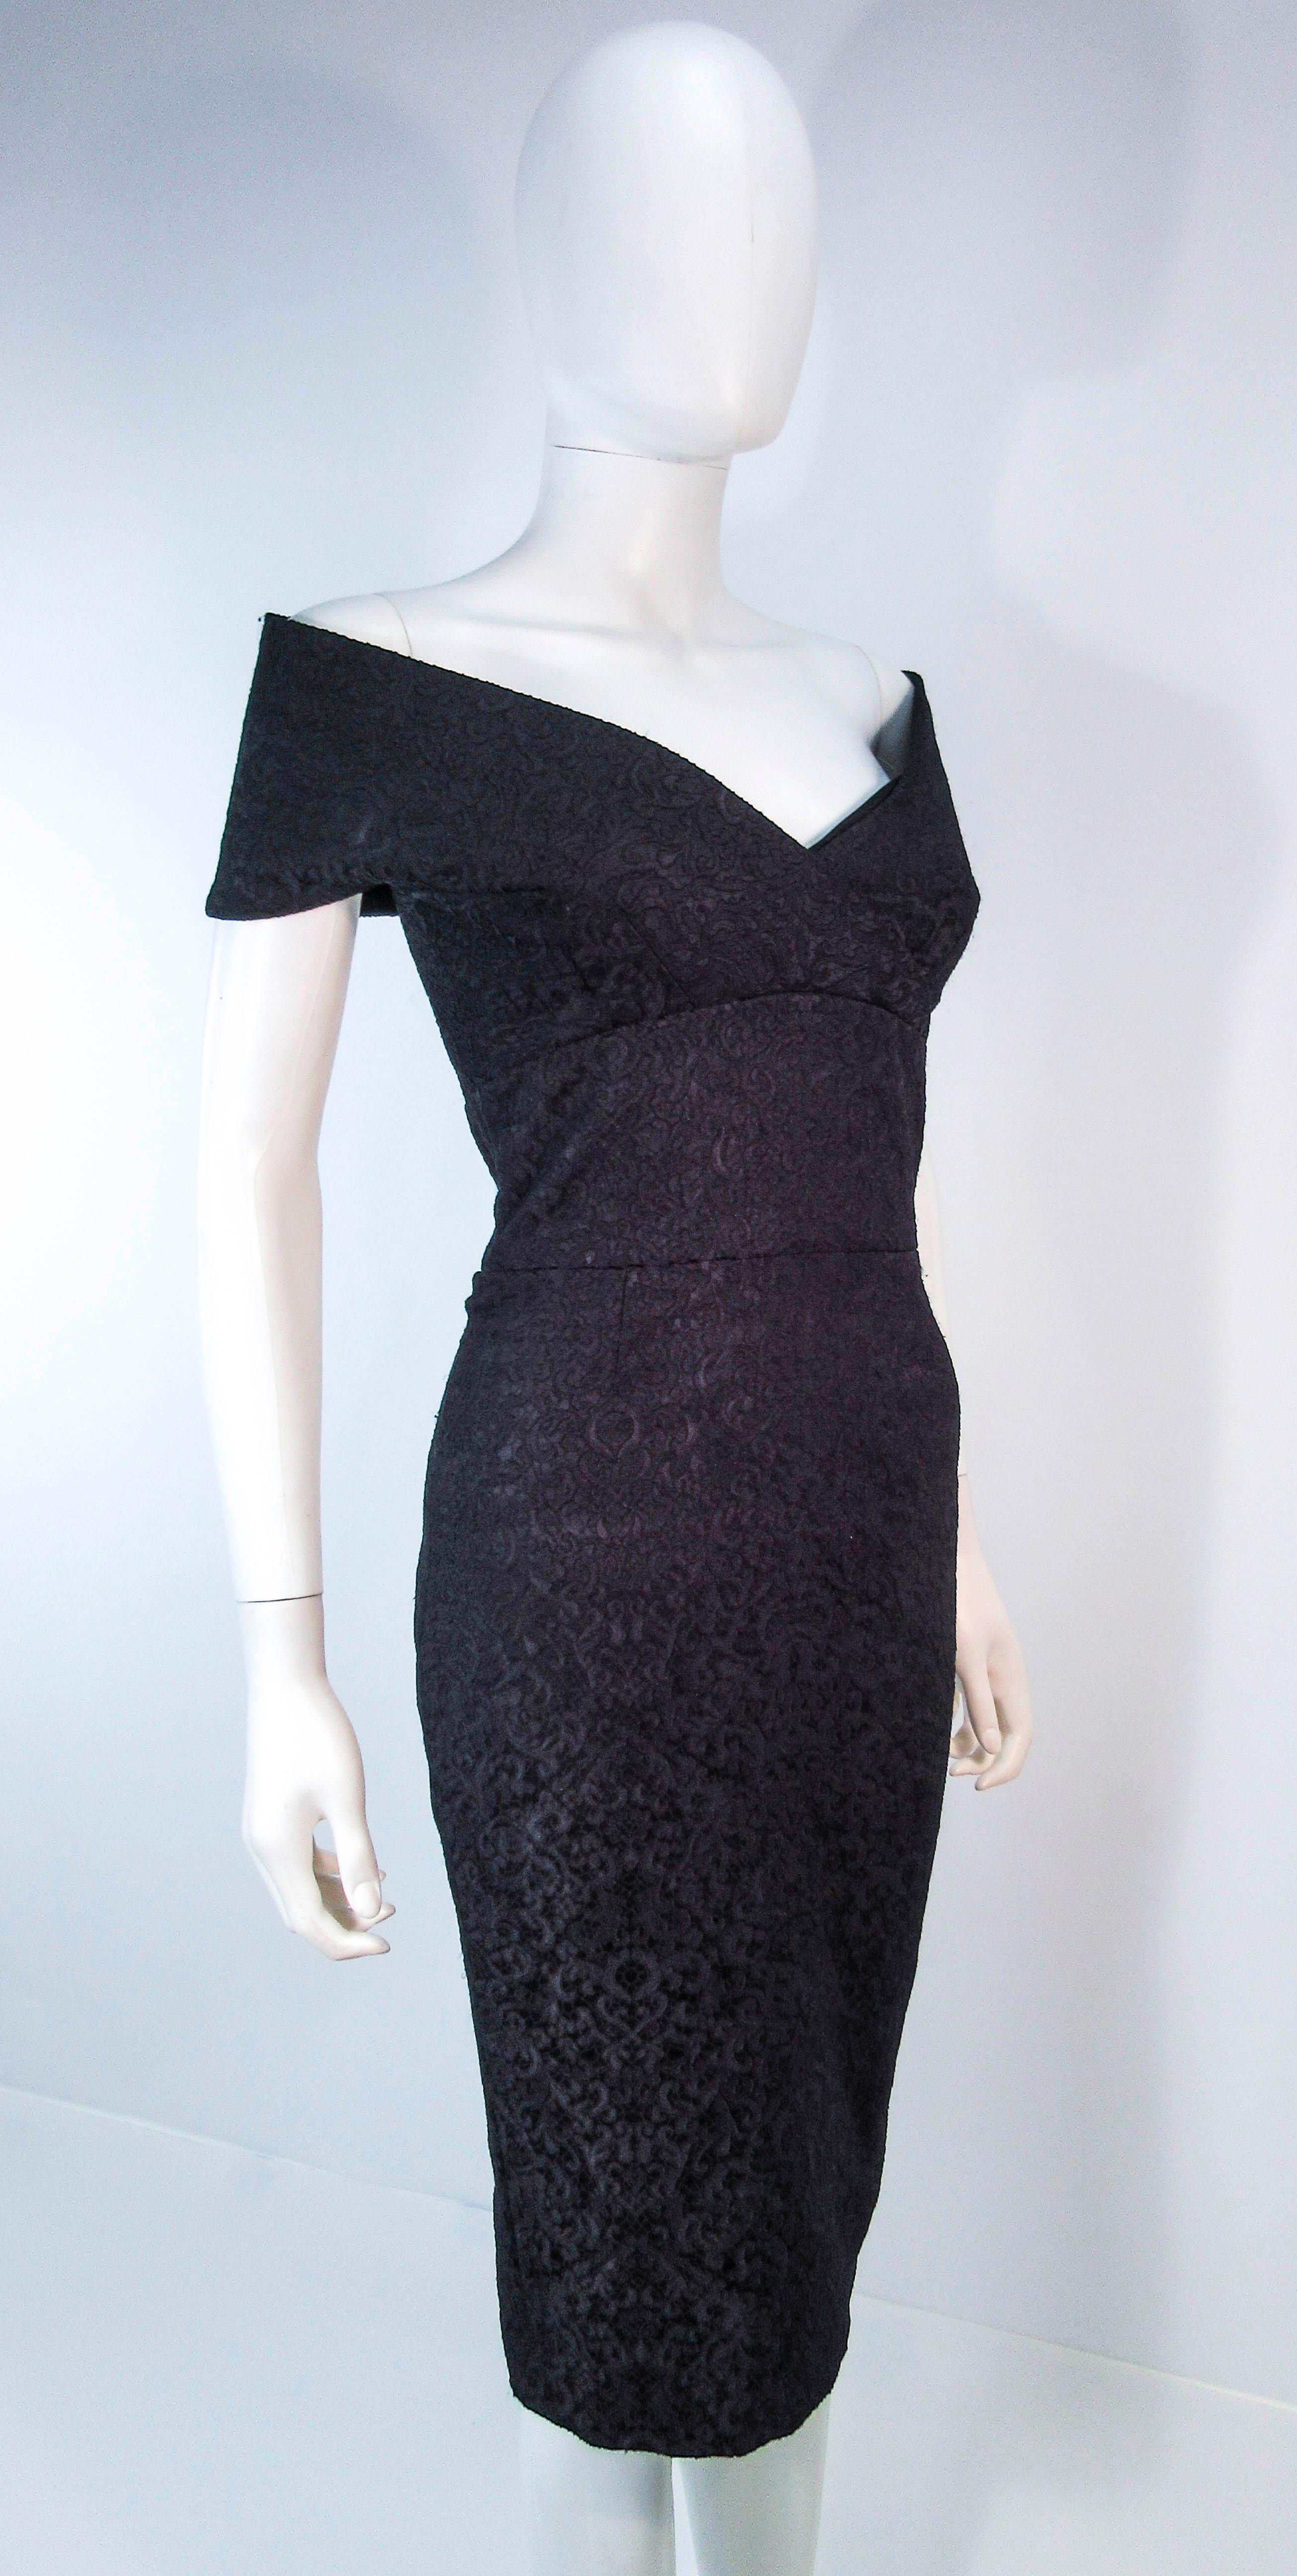 ELIZABETH MASON COUTURE 'MARIA' Black Stretch Lace Cocktail Dress Made to Order For Sale 1